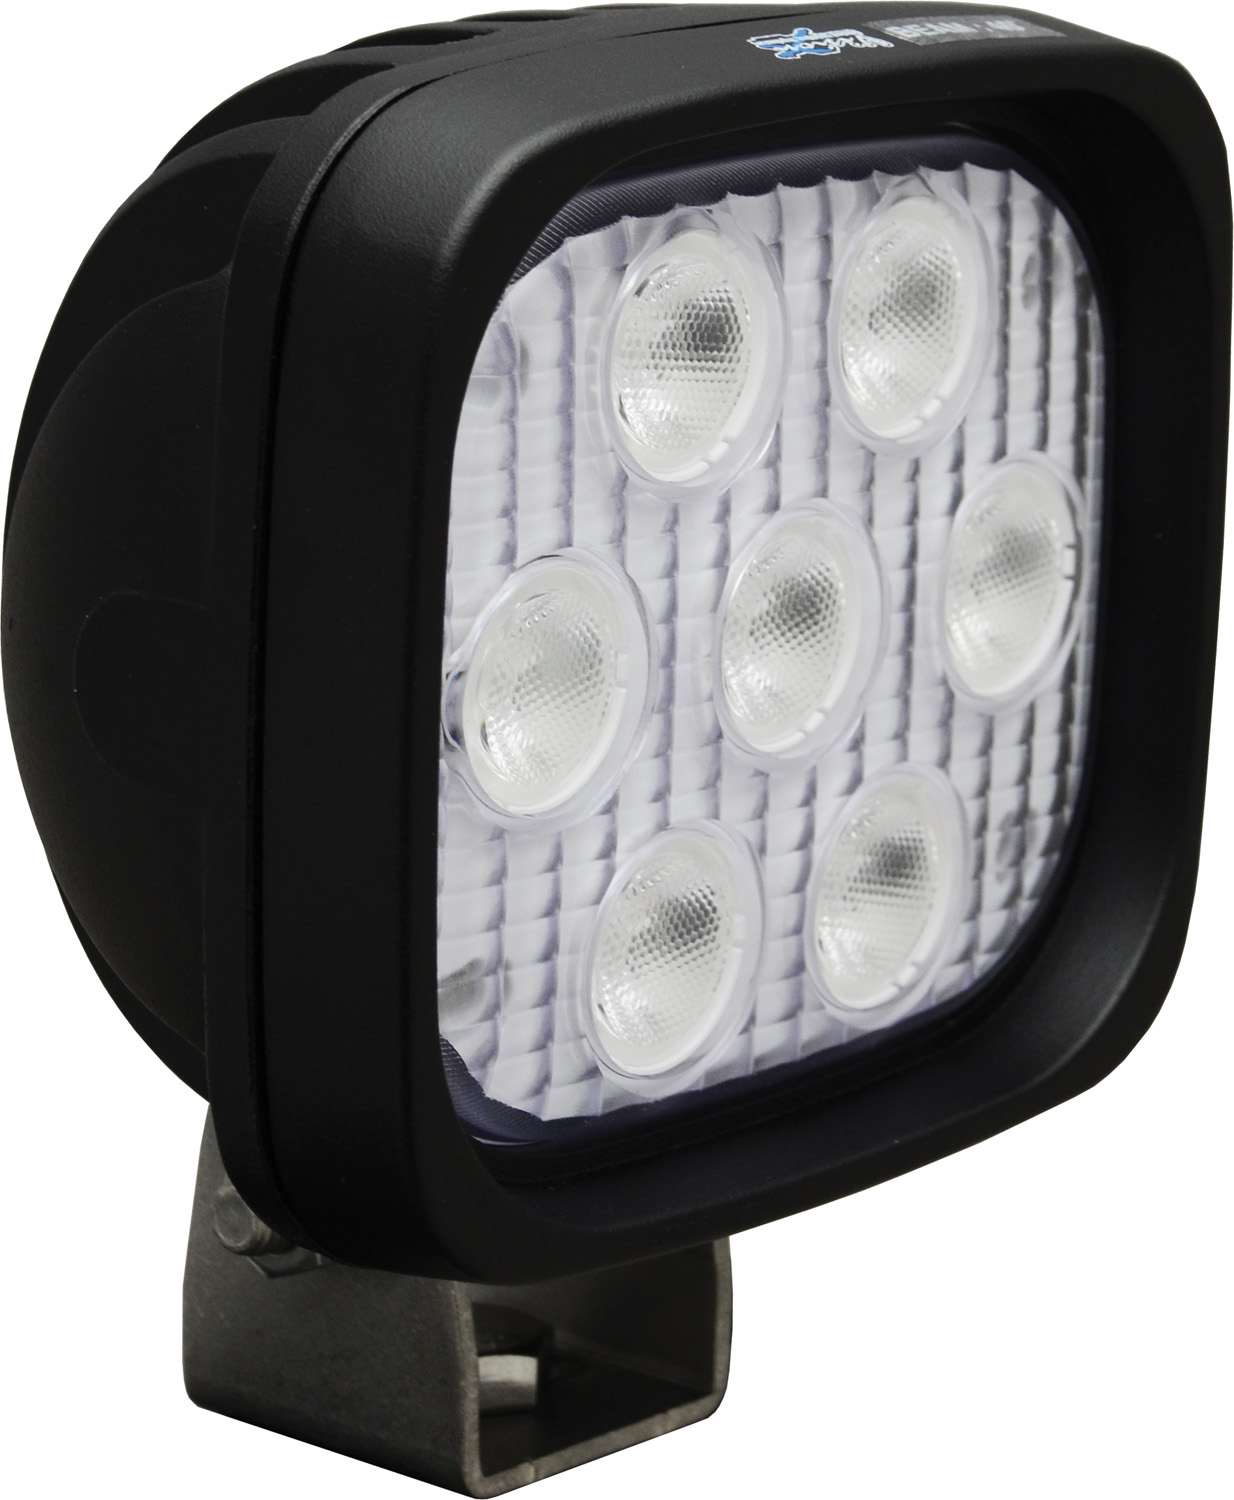 4" SQUARE UTILITY MARKET BLACK 7 3W RED LED'S 40?? WIDE